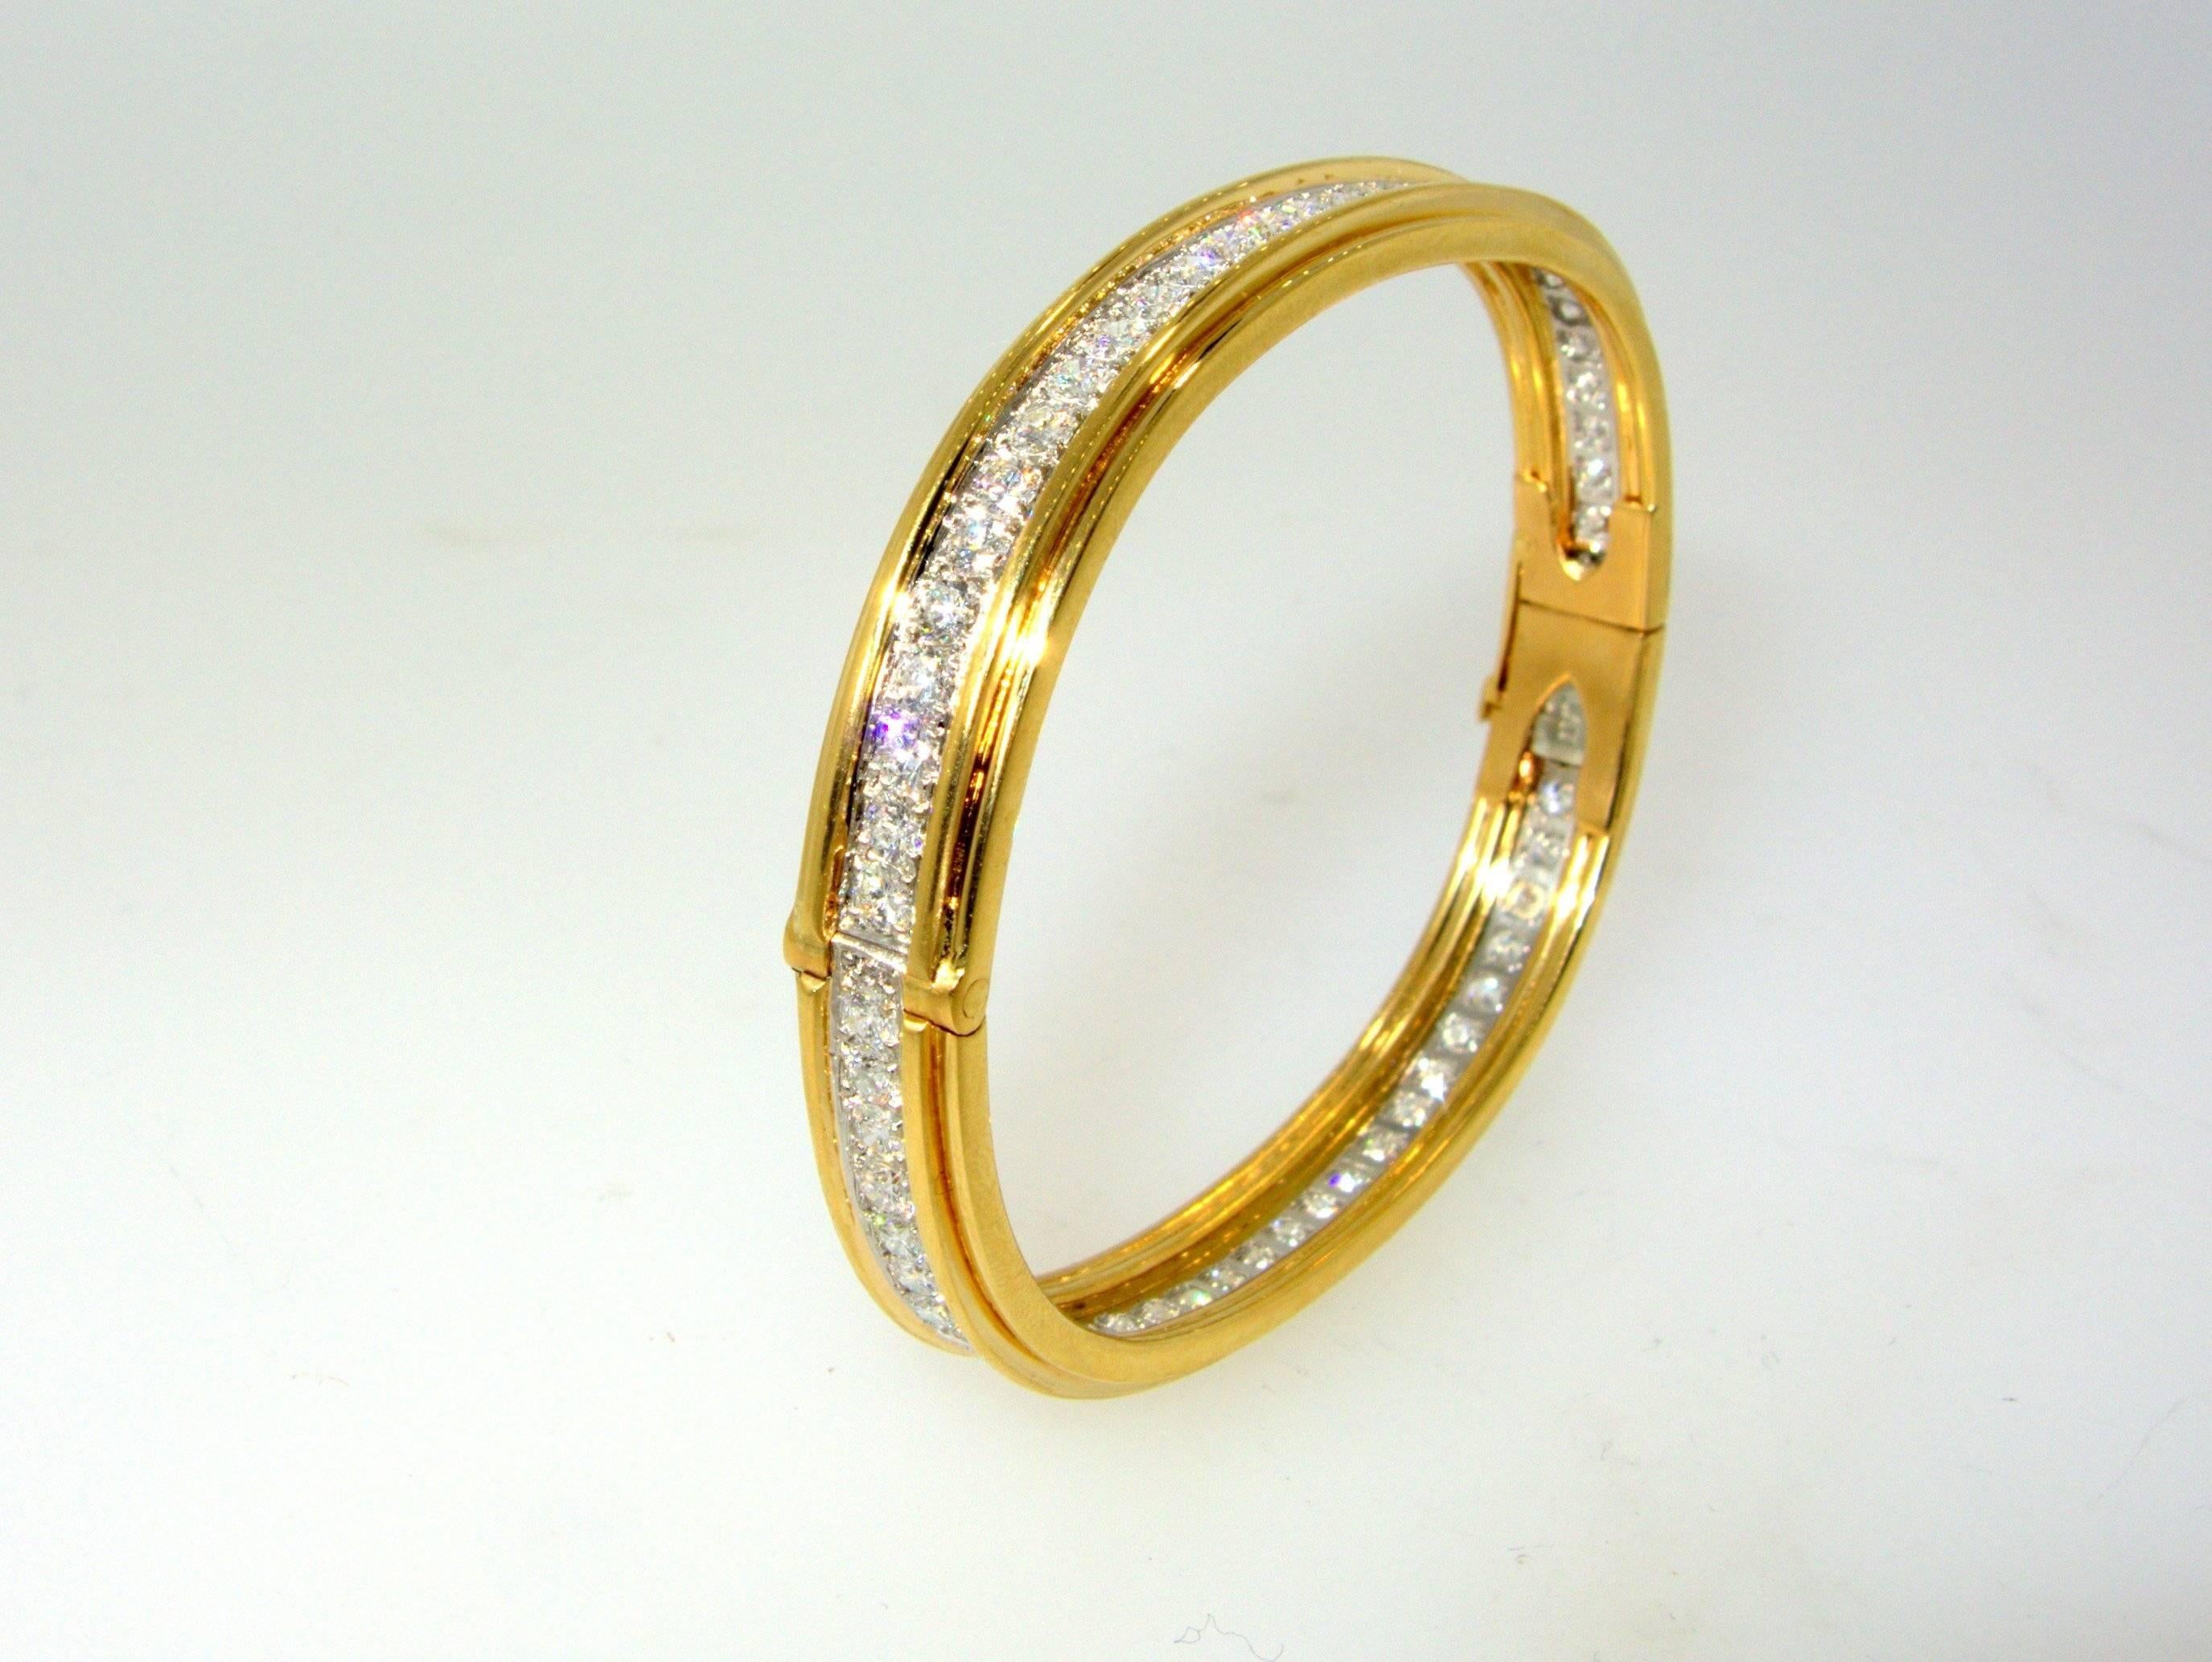 18K and platinum, this bangle bracelet possesses very fine diamonds set into platinum and rimmed with gold.  The 62 diamonds are all colorless (F) and very very slightly included (VVS).  There are approximately 5 cts.  This piece is a good size, it